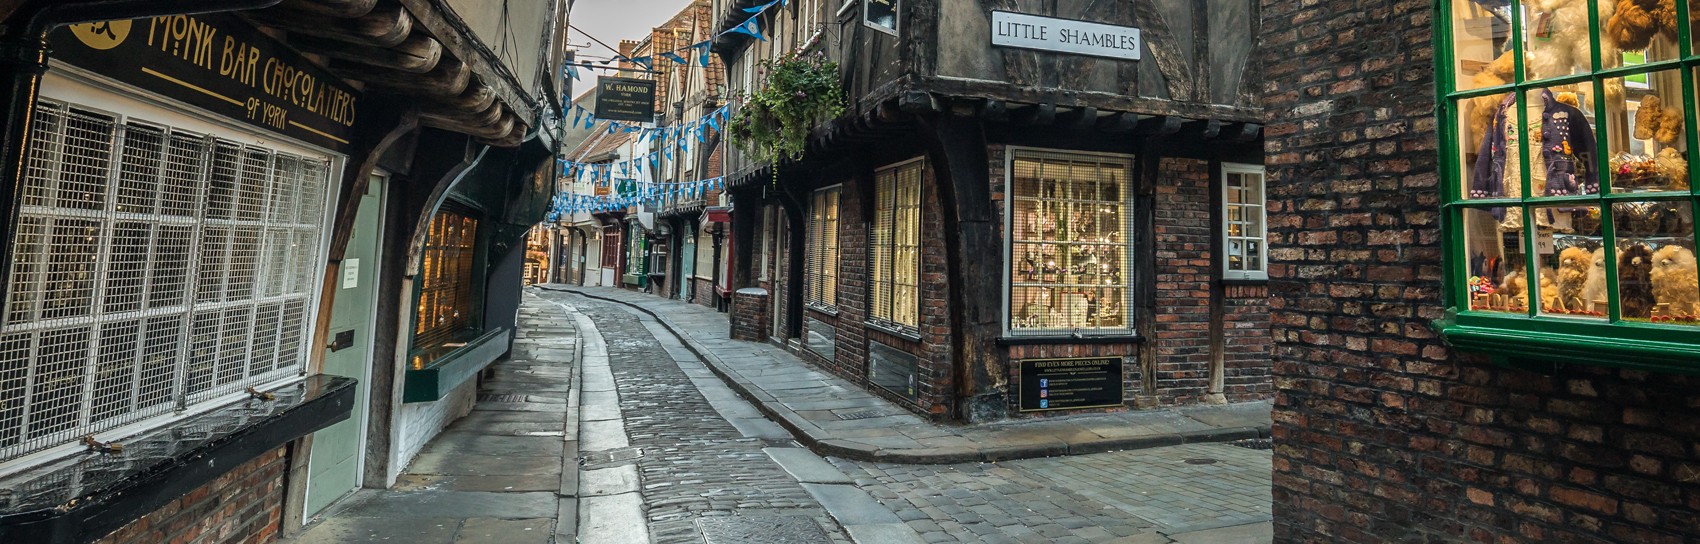 The Shambles in York in Yorkshire. Photograph by DAVE ZDANOWICZ